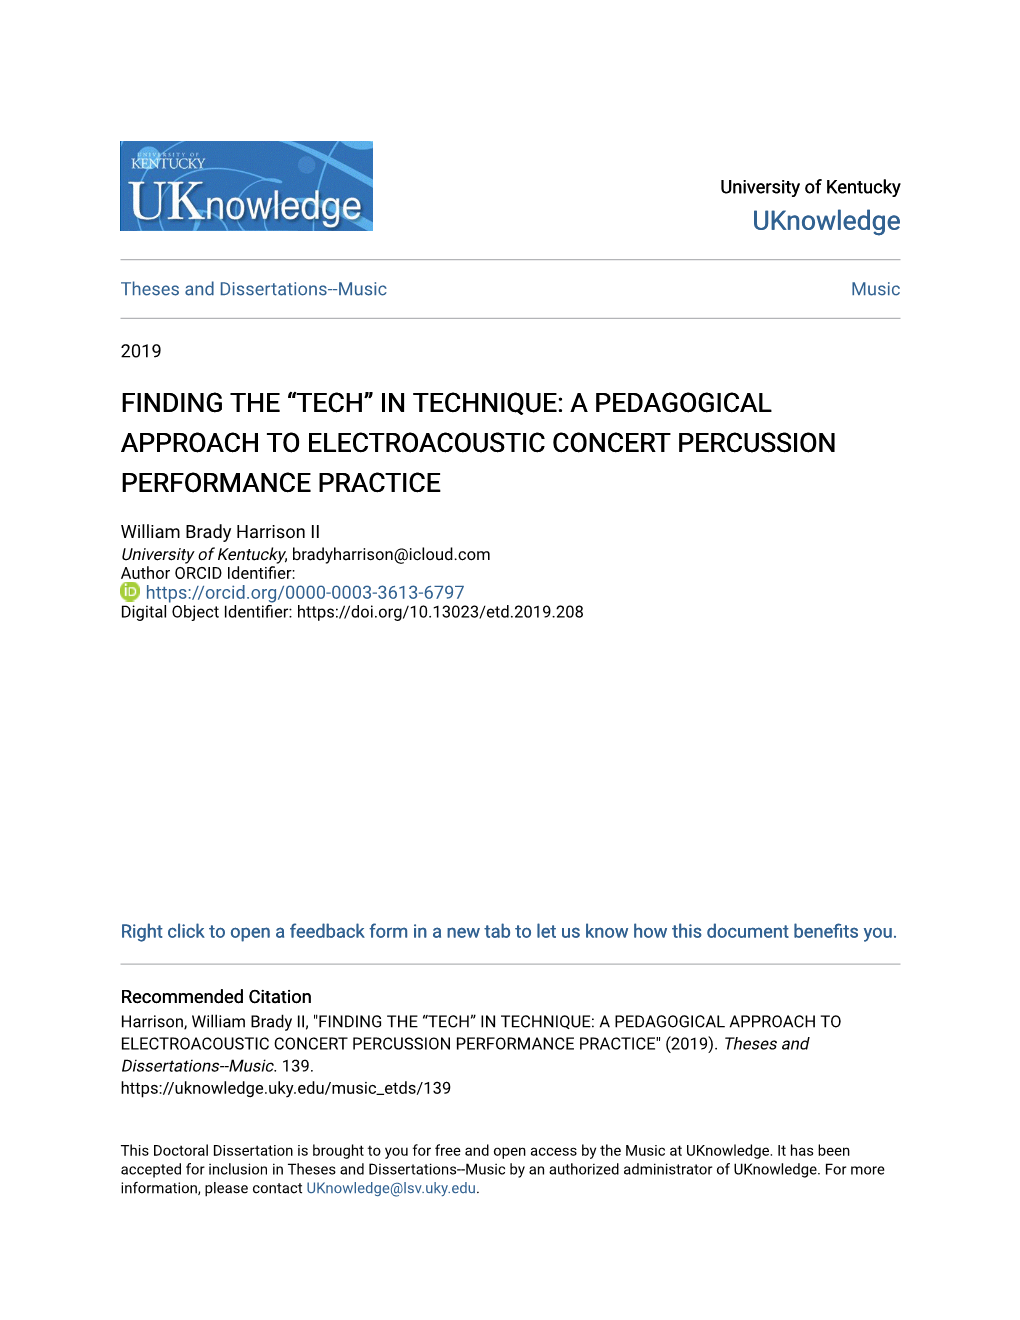 “Tech” in Technique: a Pedagogical Approach to Electroacoustic Concert Percussion Performance Practice